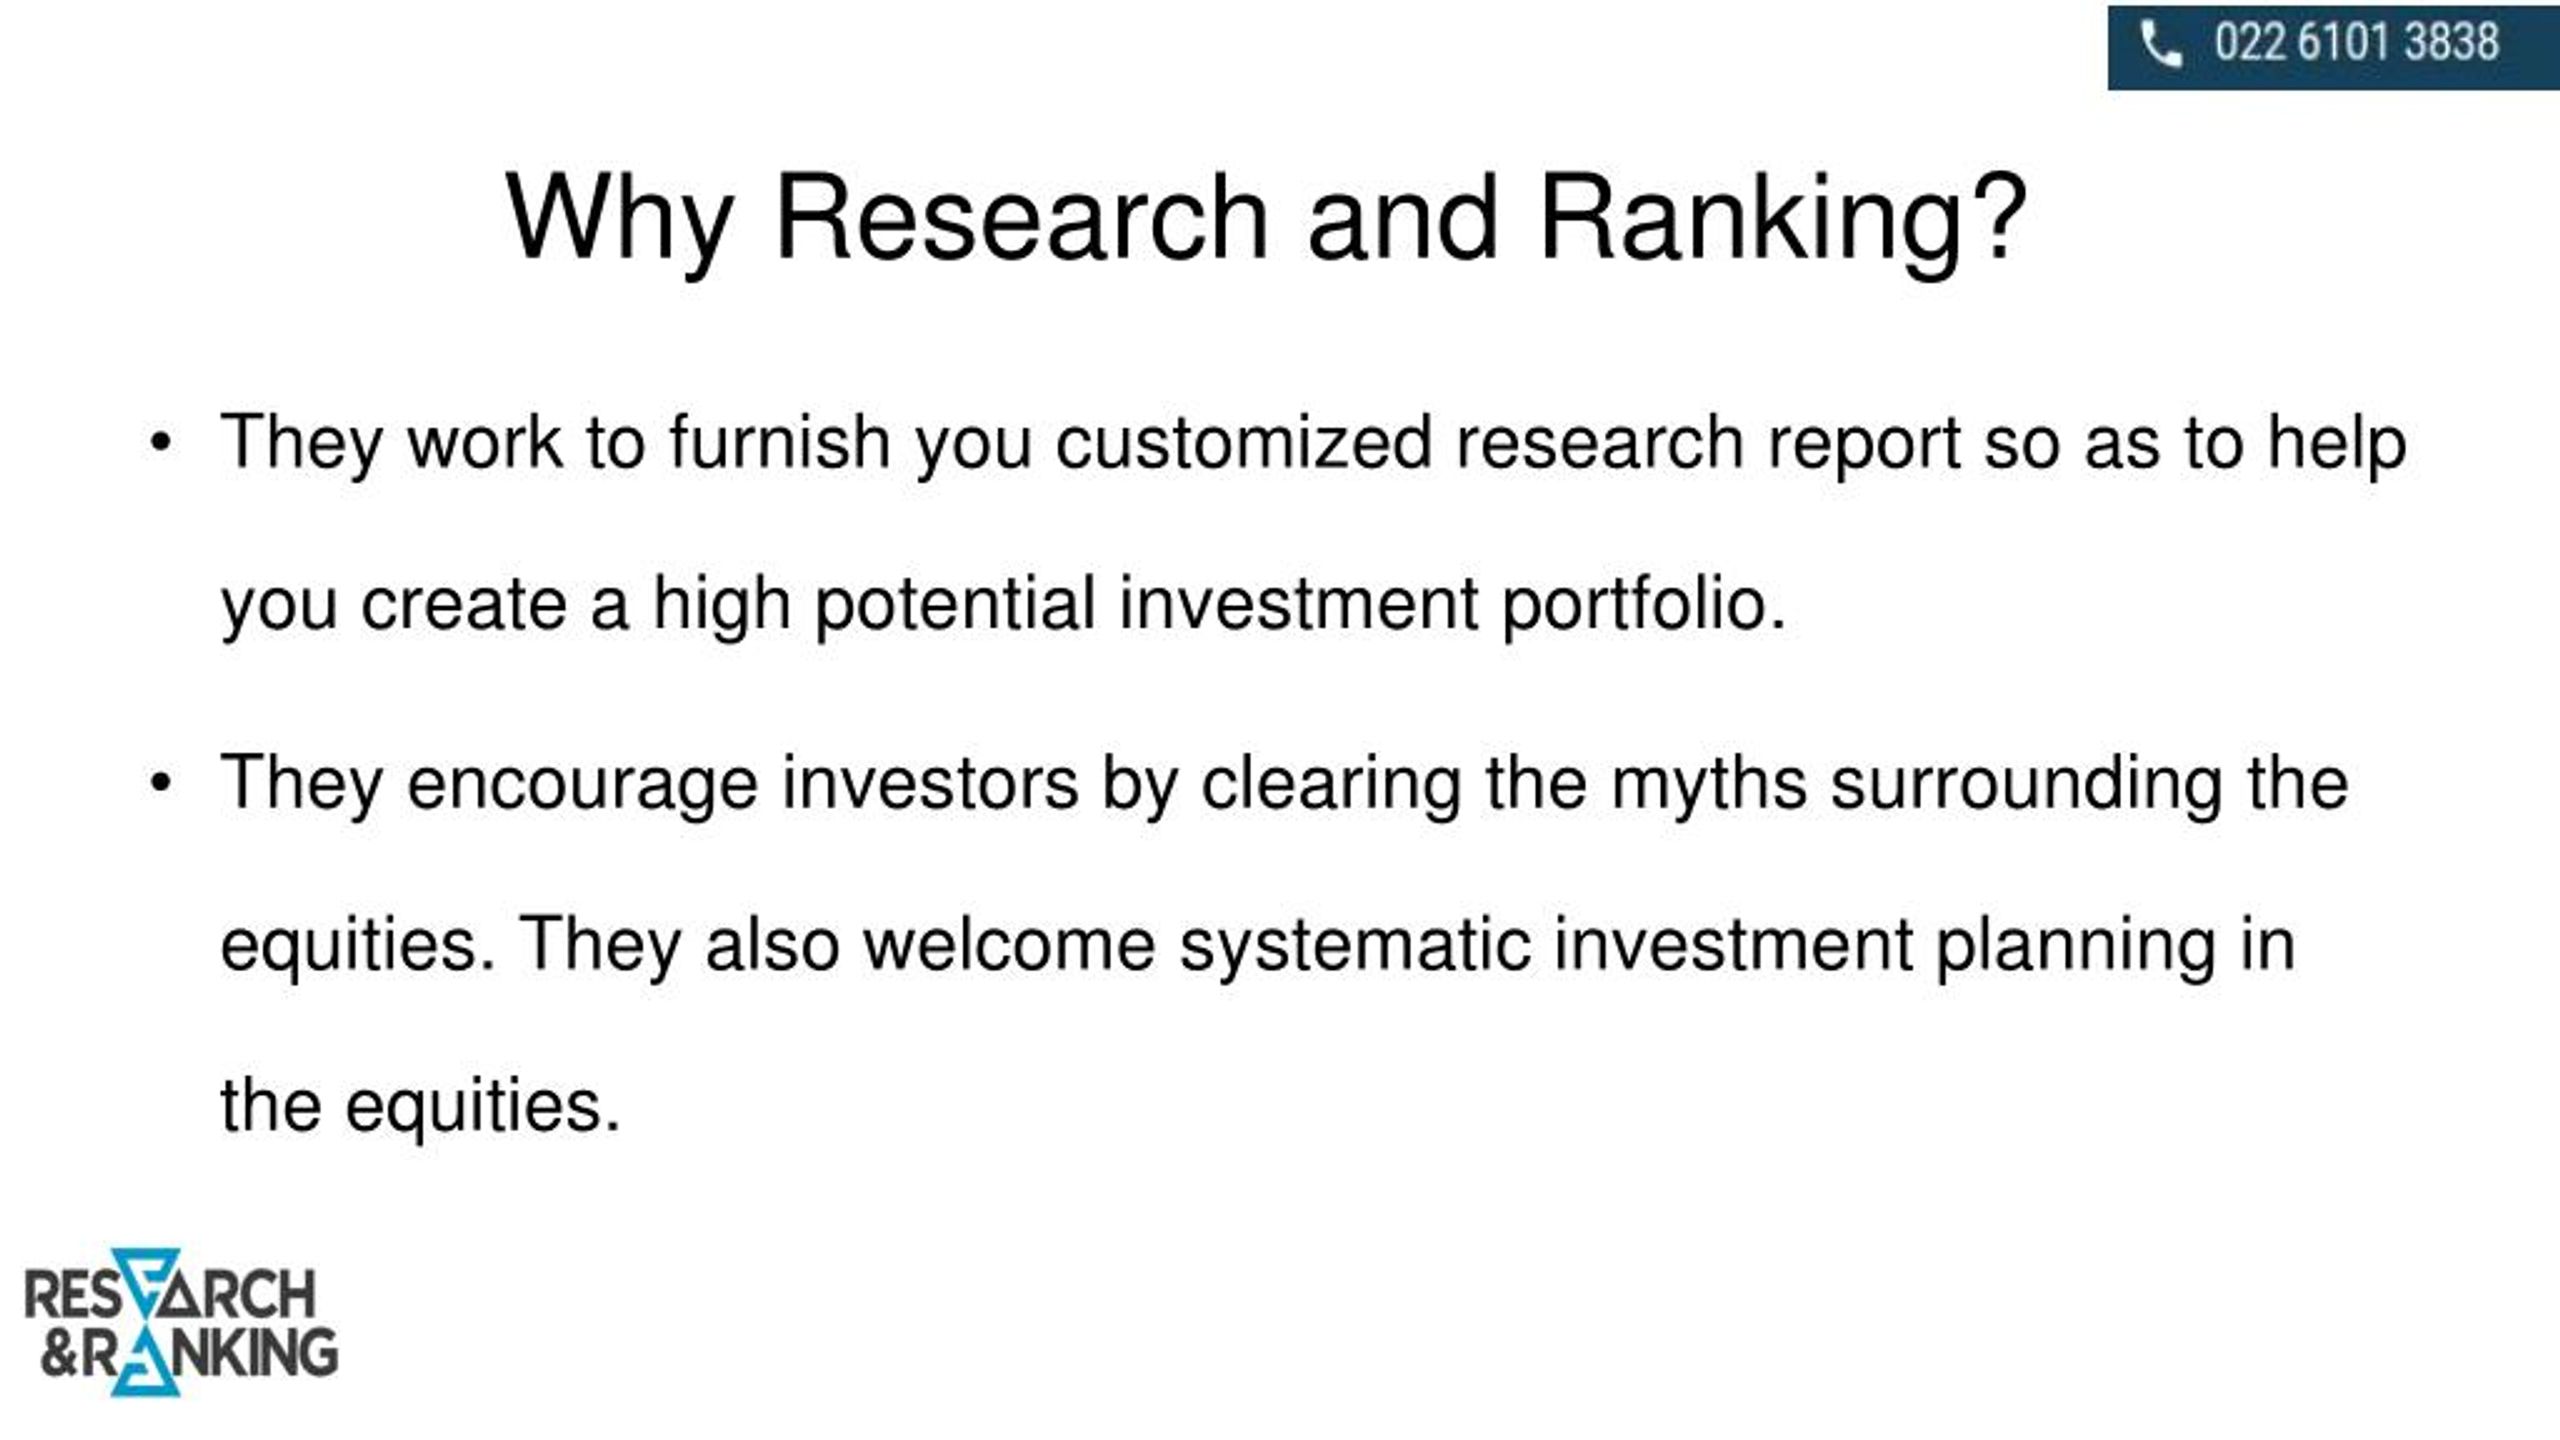 how is research and ranking